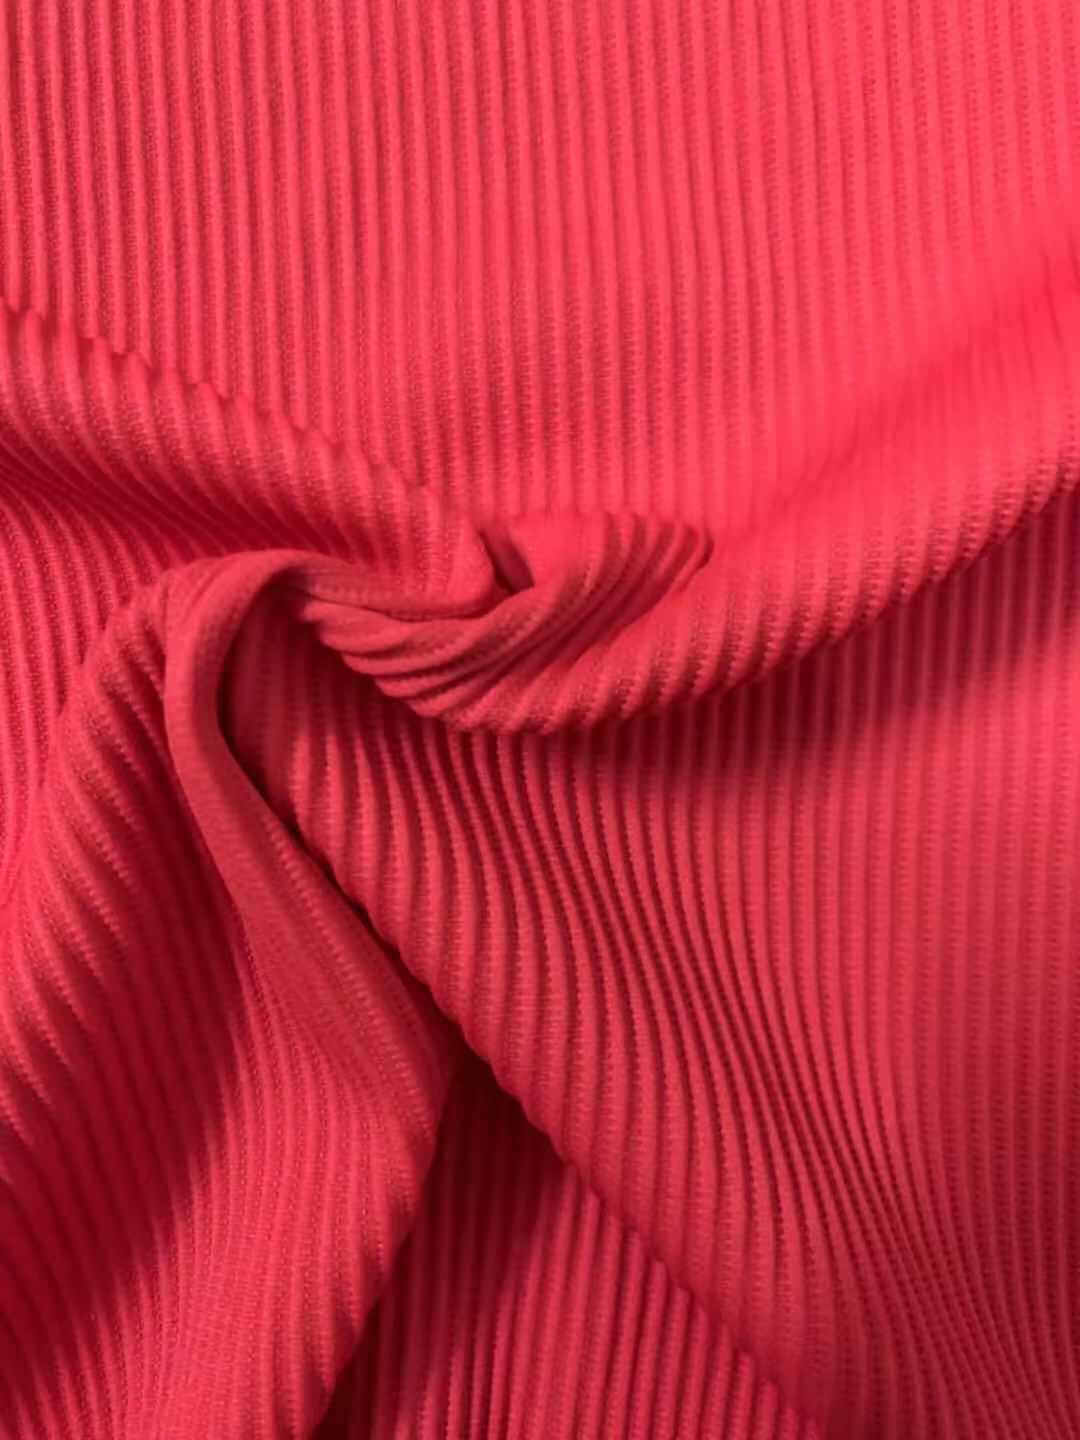 Whosale Red Rib Knit Fabric By The Yard